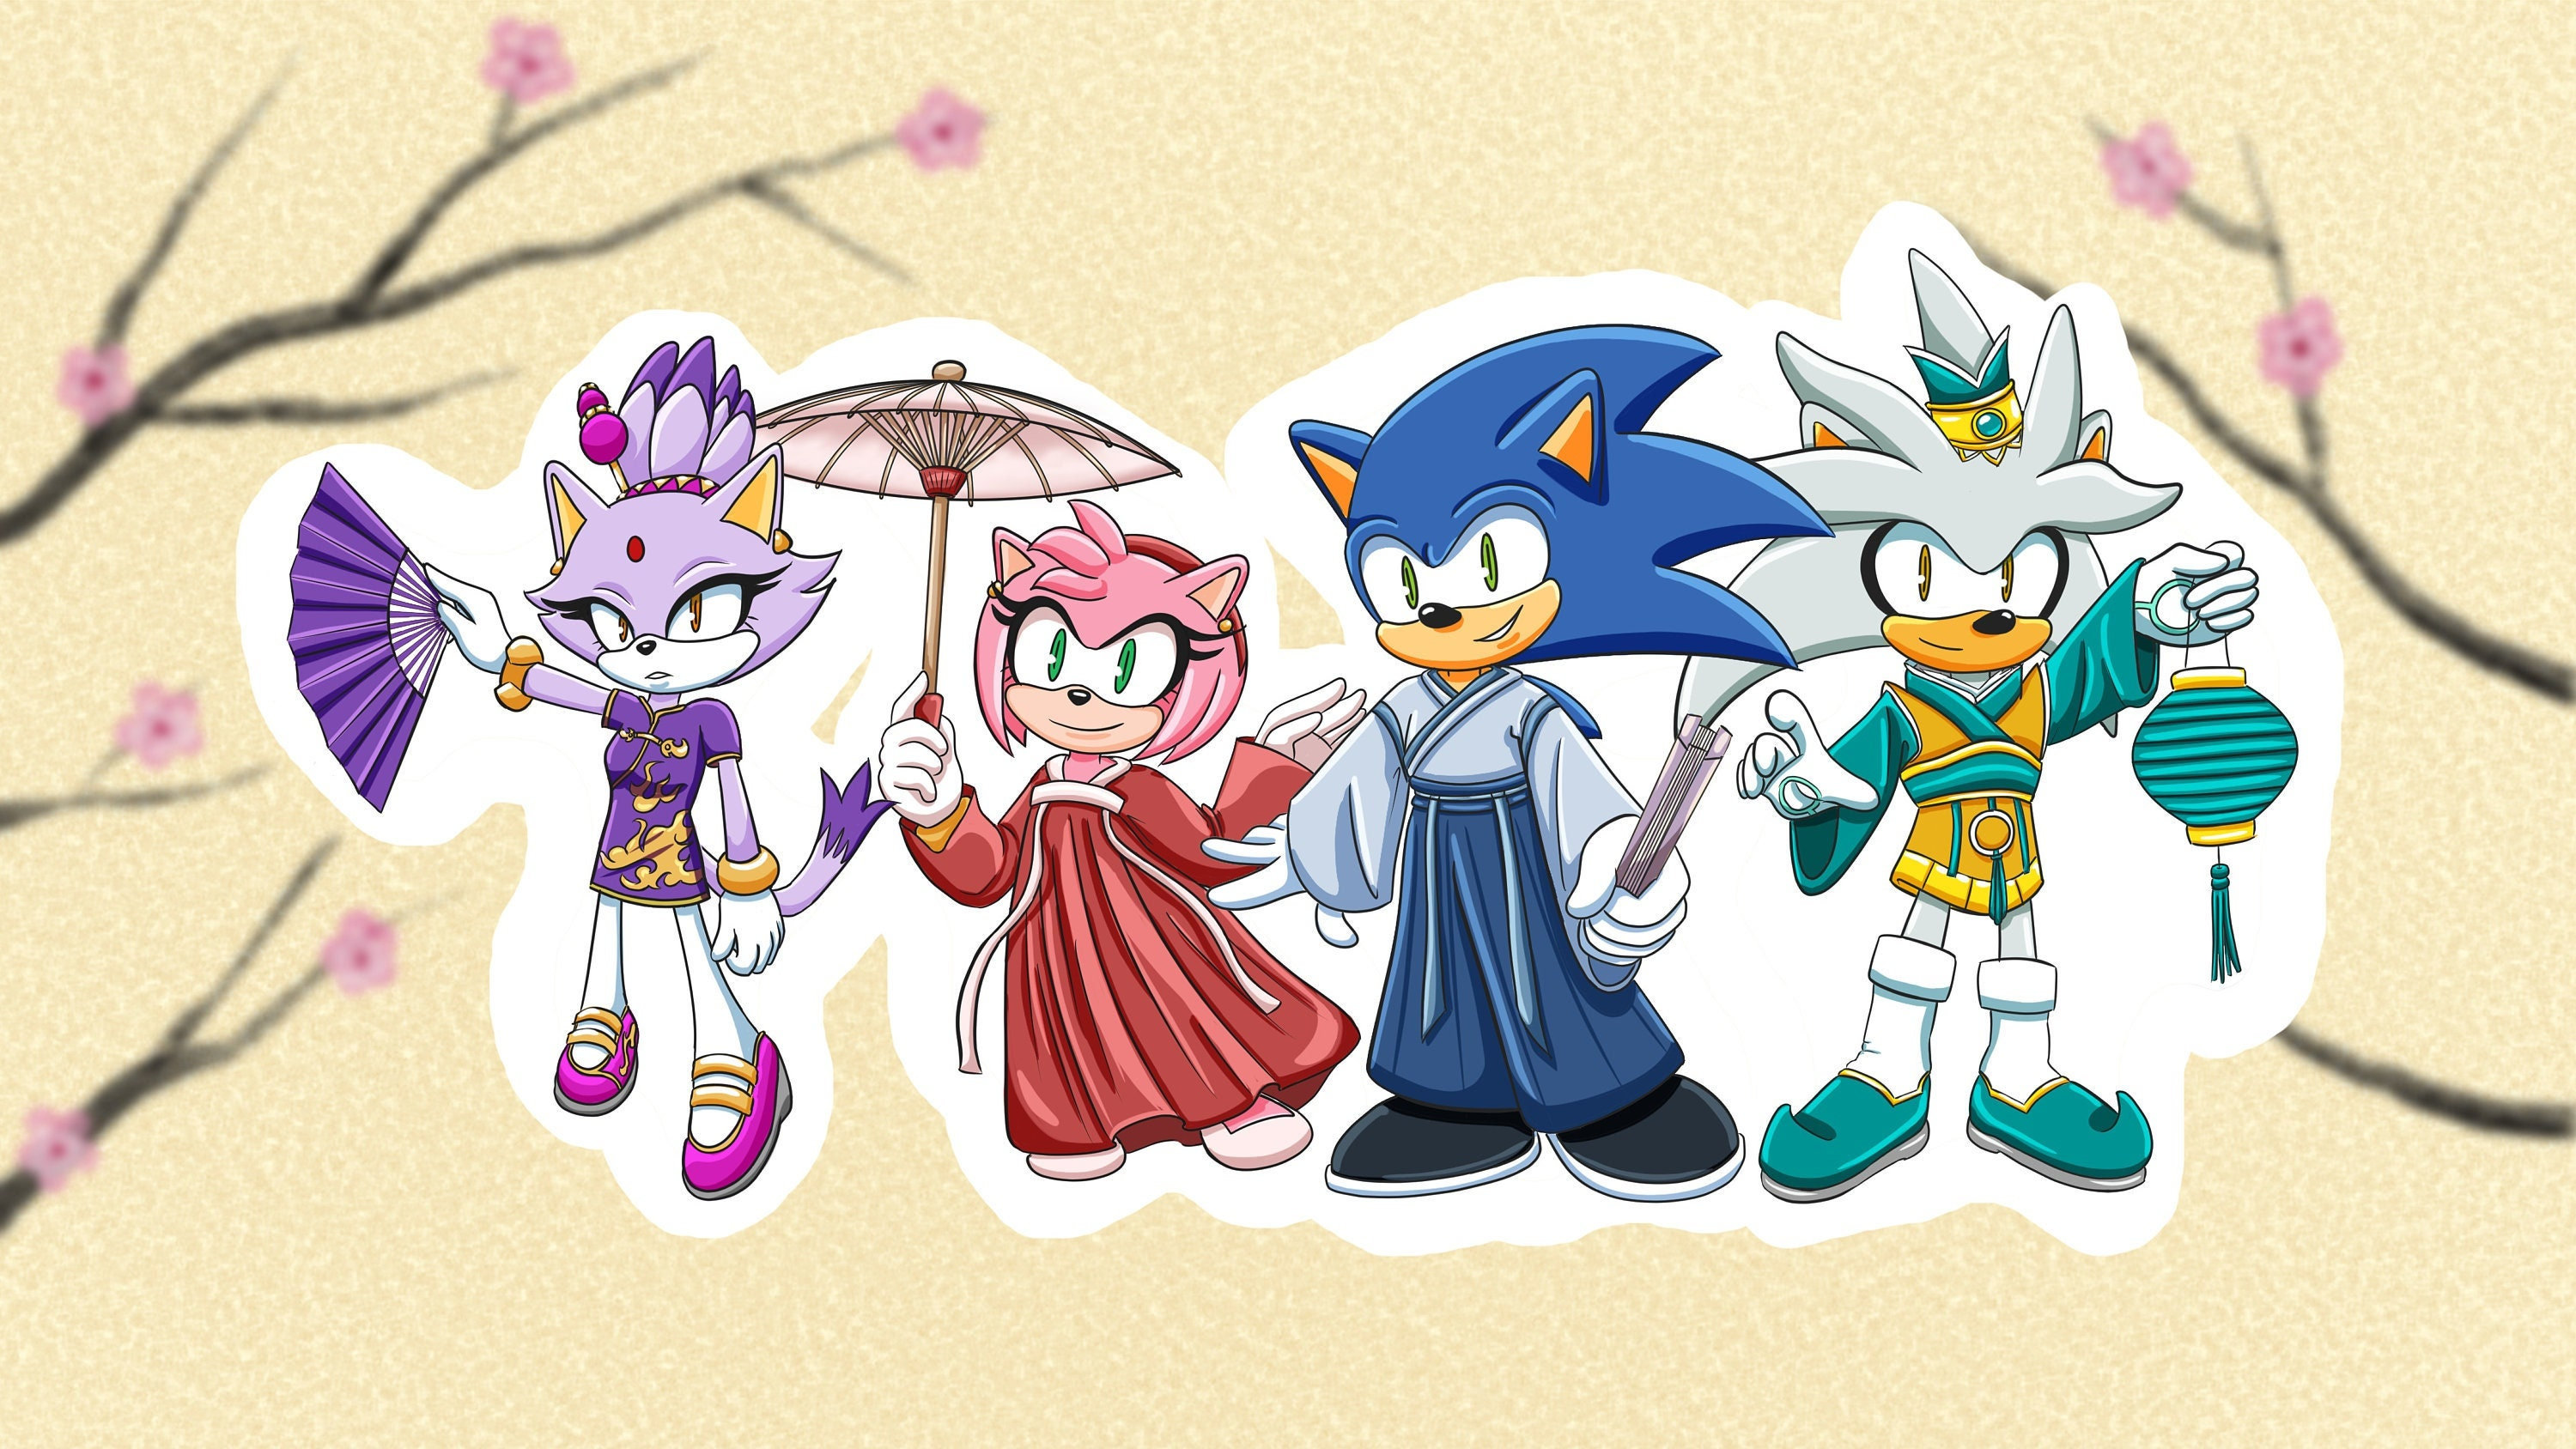 SONIC Matte Vinyl sticker pack - Sonic, Knuckles, Tails, Amy, Shadow,  Rouge, Silver, Blaze - ( 3 in / 7,6 cm) - Flopicas's Ko-fi Shop - Ko-fi ❤️  Where creators get support